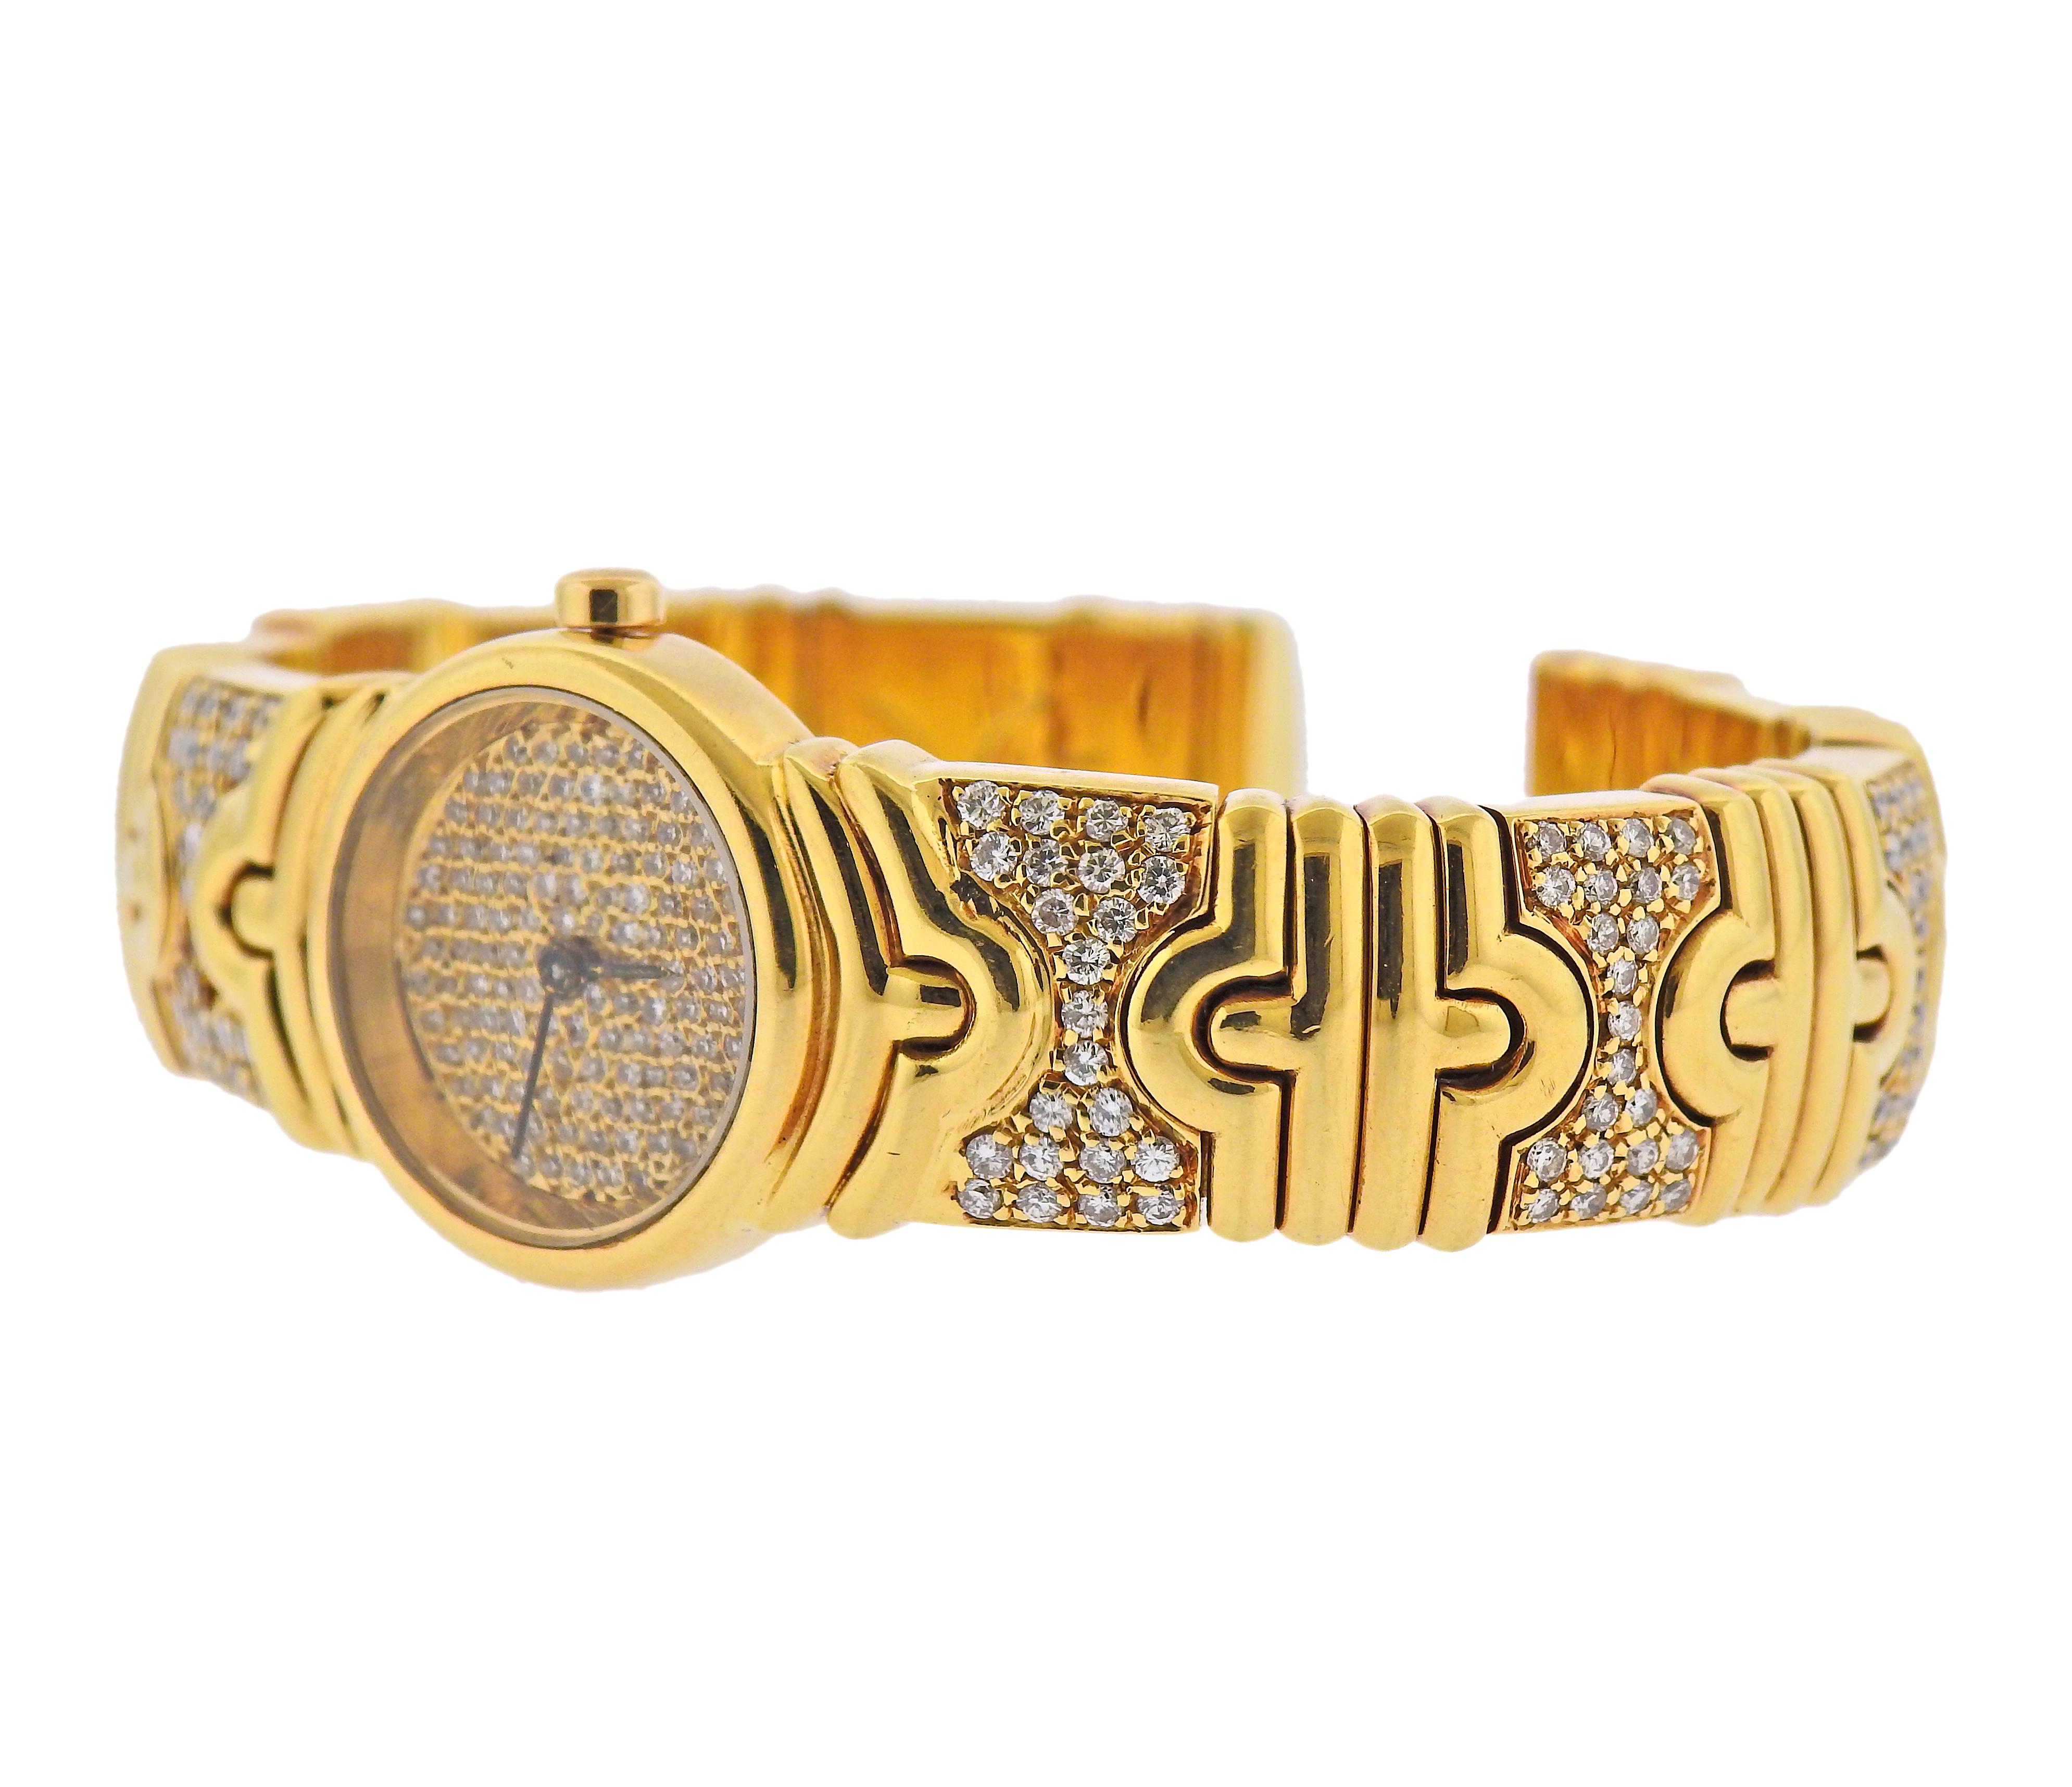 Impressive 18k gold Parents watch bracelet by Bvlgari, decorated with a total of approx. 4 carats in diamonds (one stone is missing), on bracelet and dial. Bracelet will fit approx. 6.75